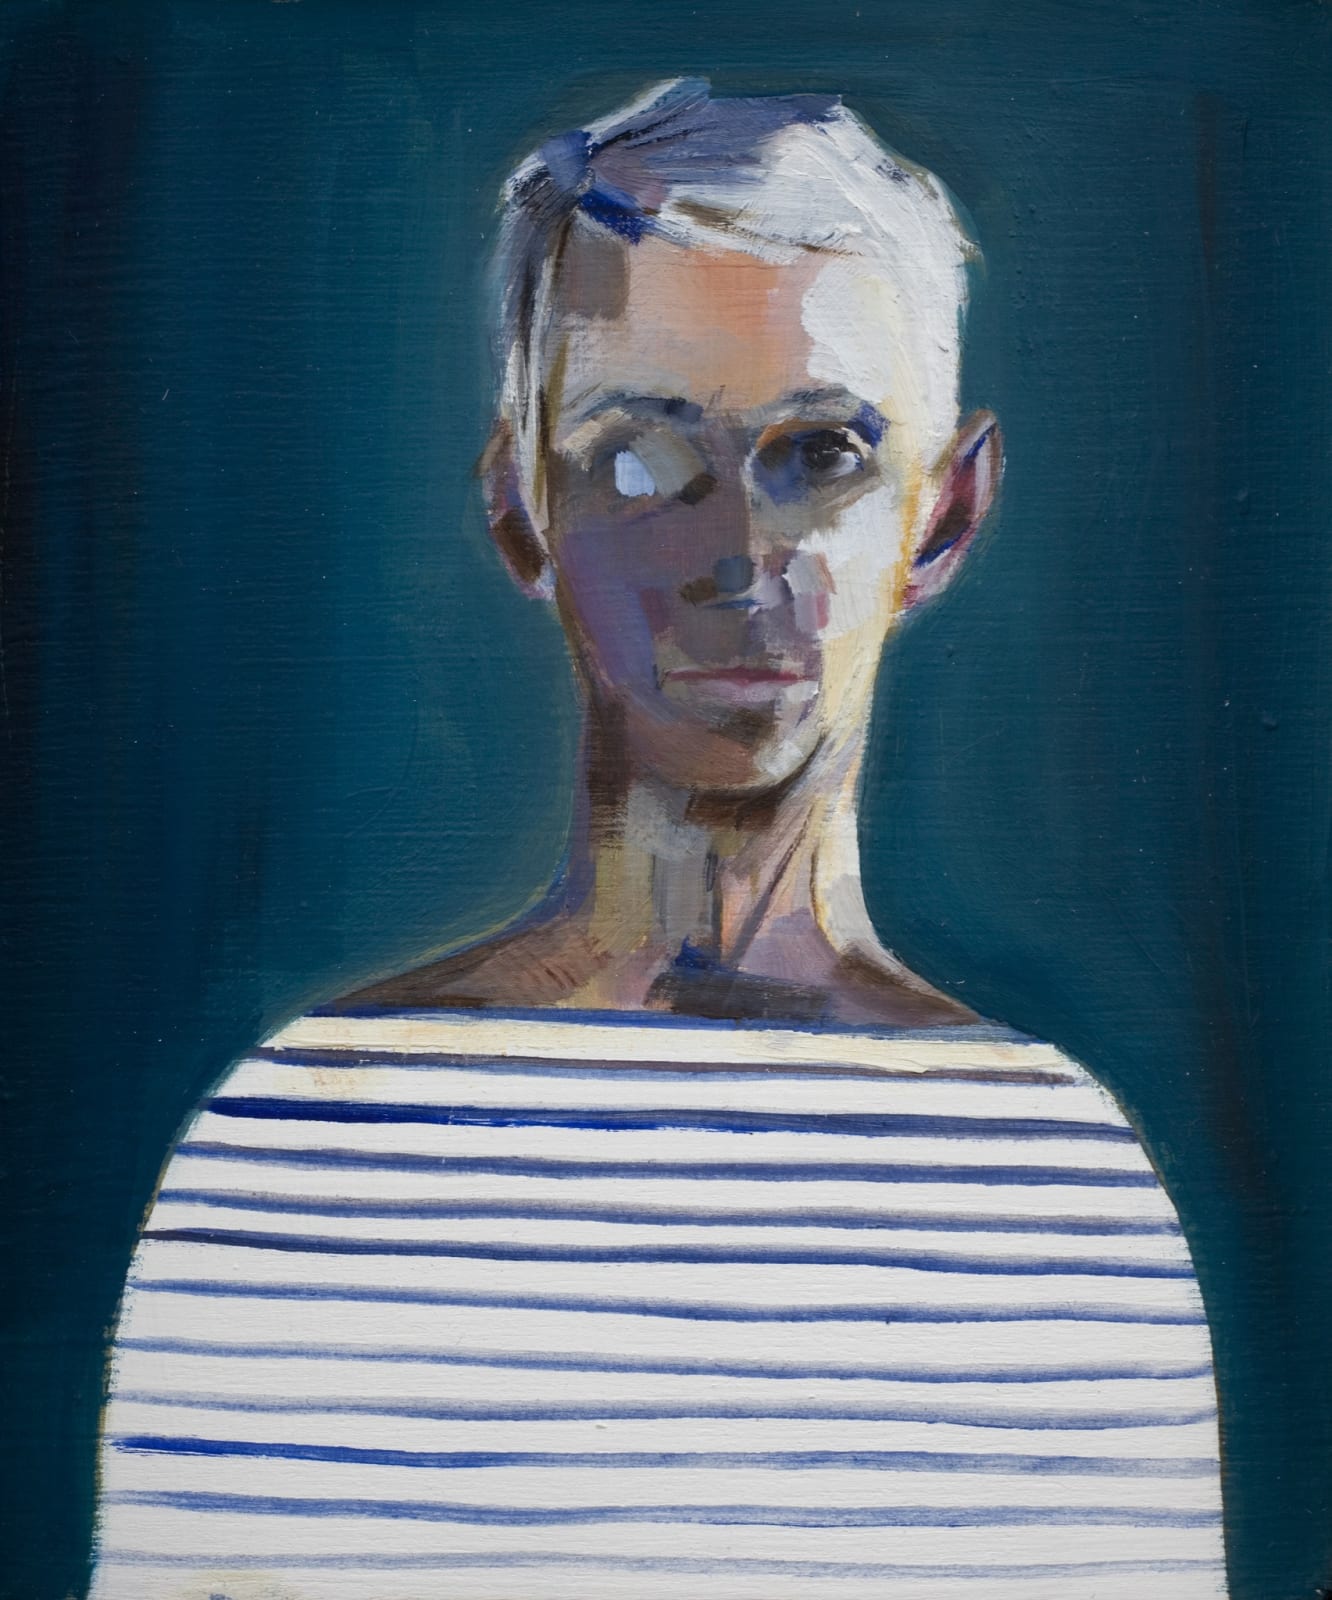 Sally Muir, Self-Portrait without Glasses